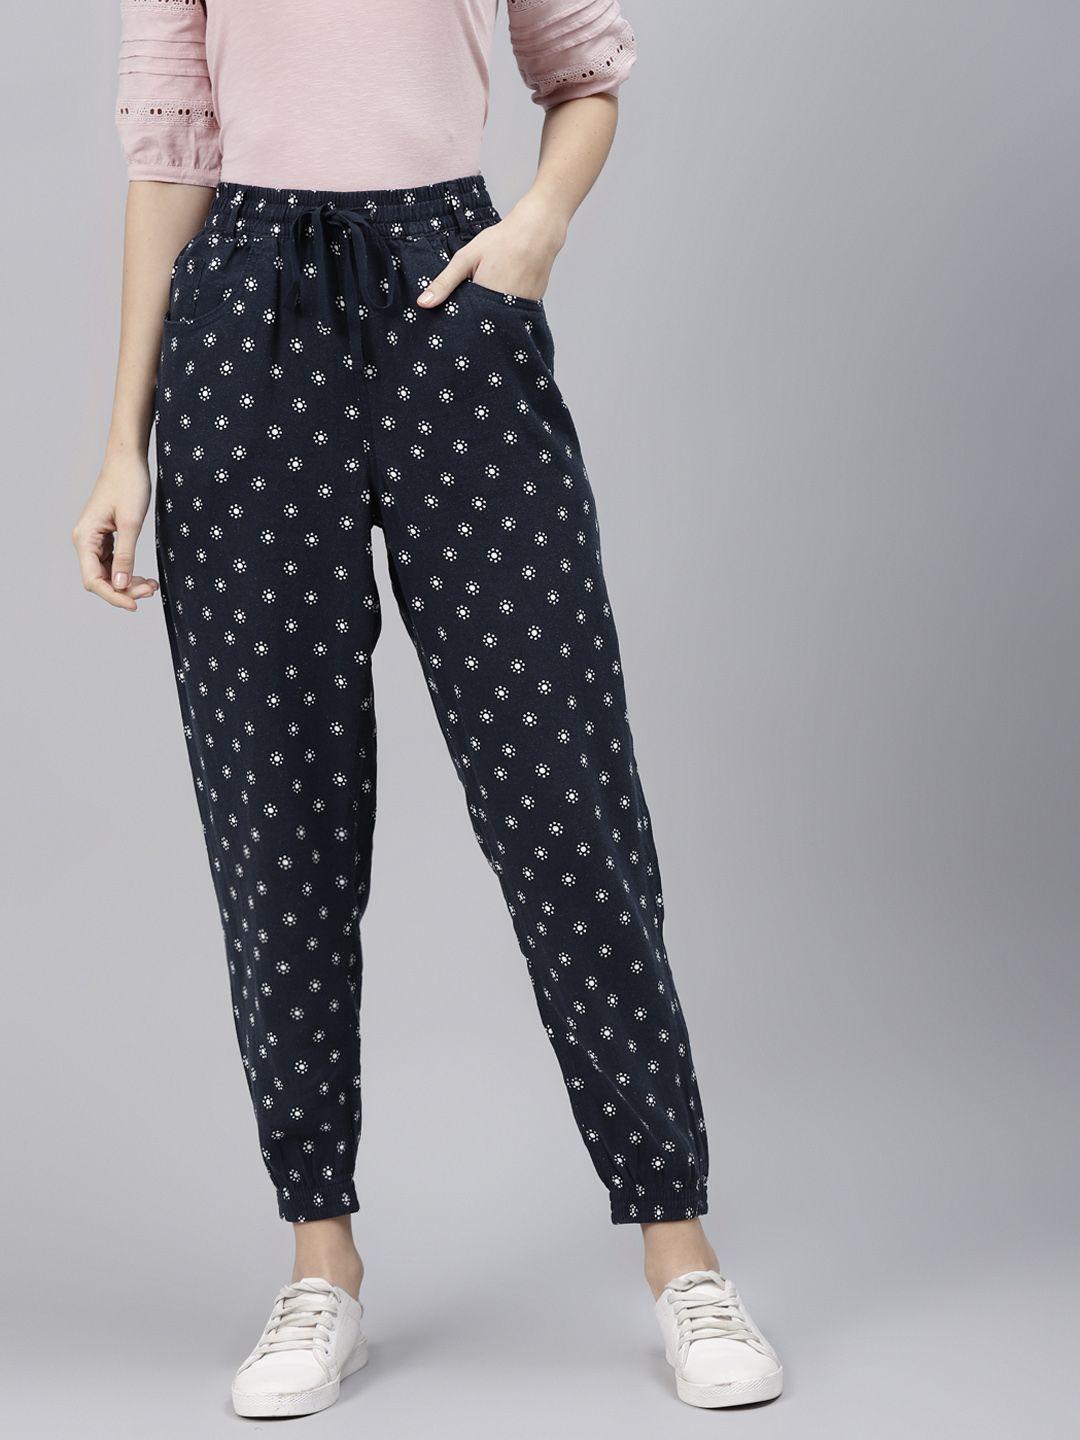 marks & spencer women navy blue floral printed linen joggers trousers